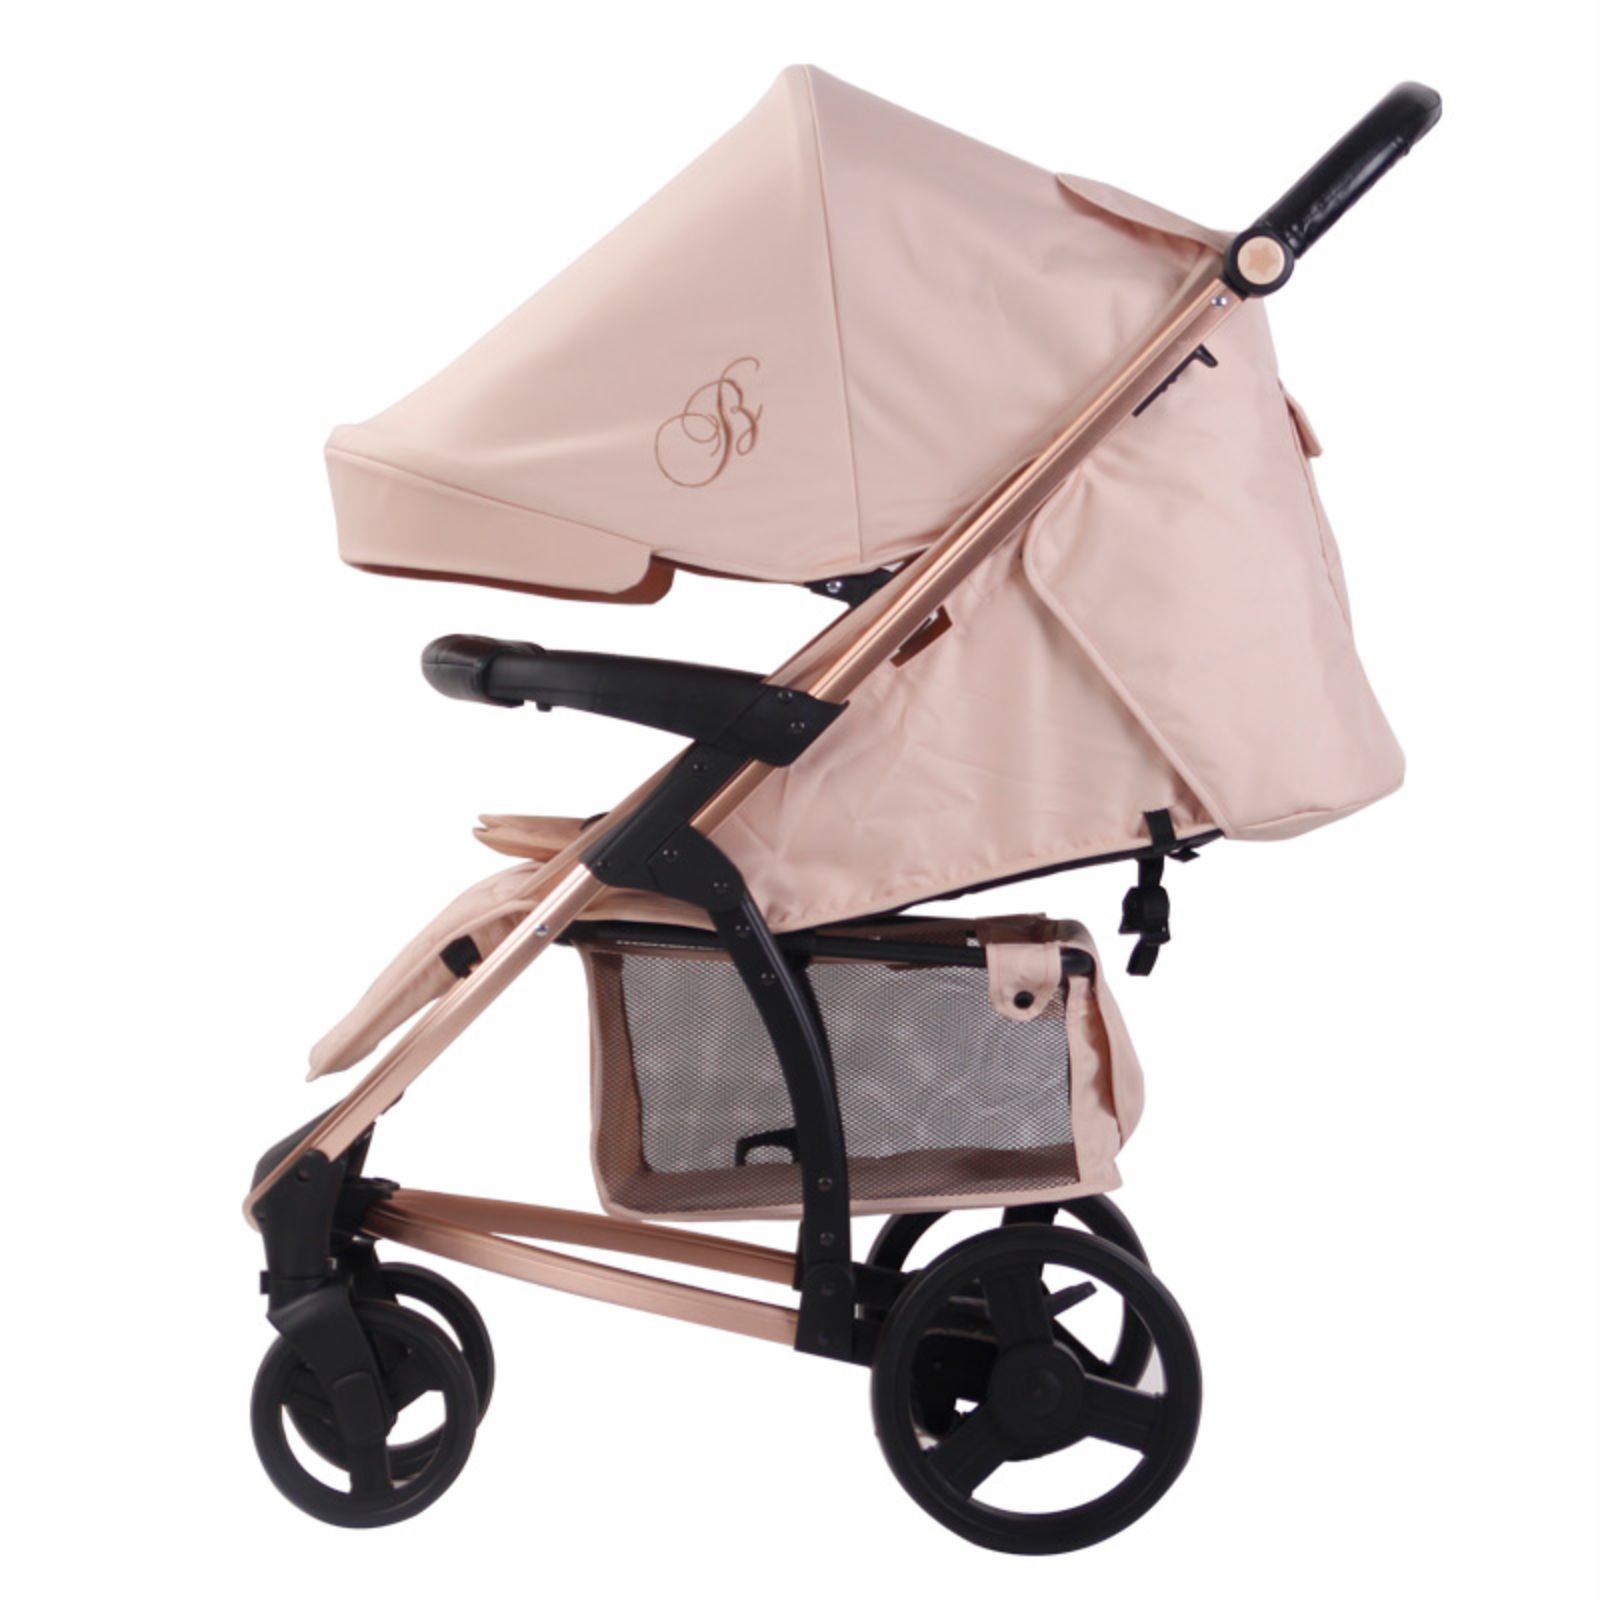 my babiie billie faiers mb200 rose blush travel system